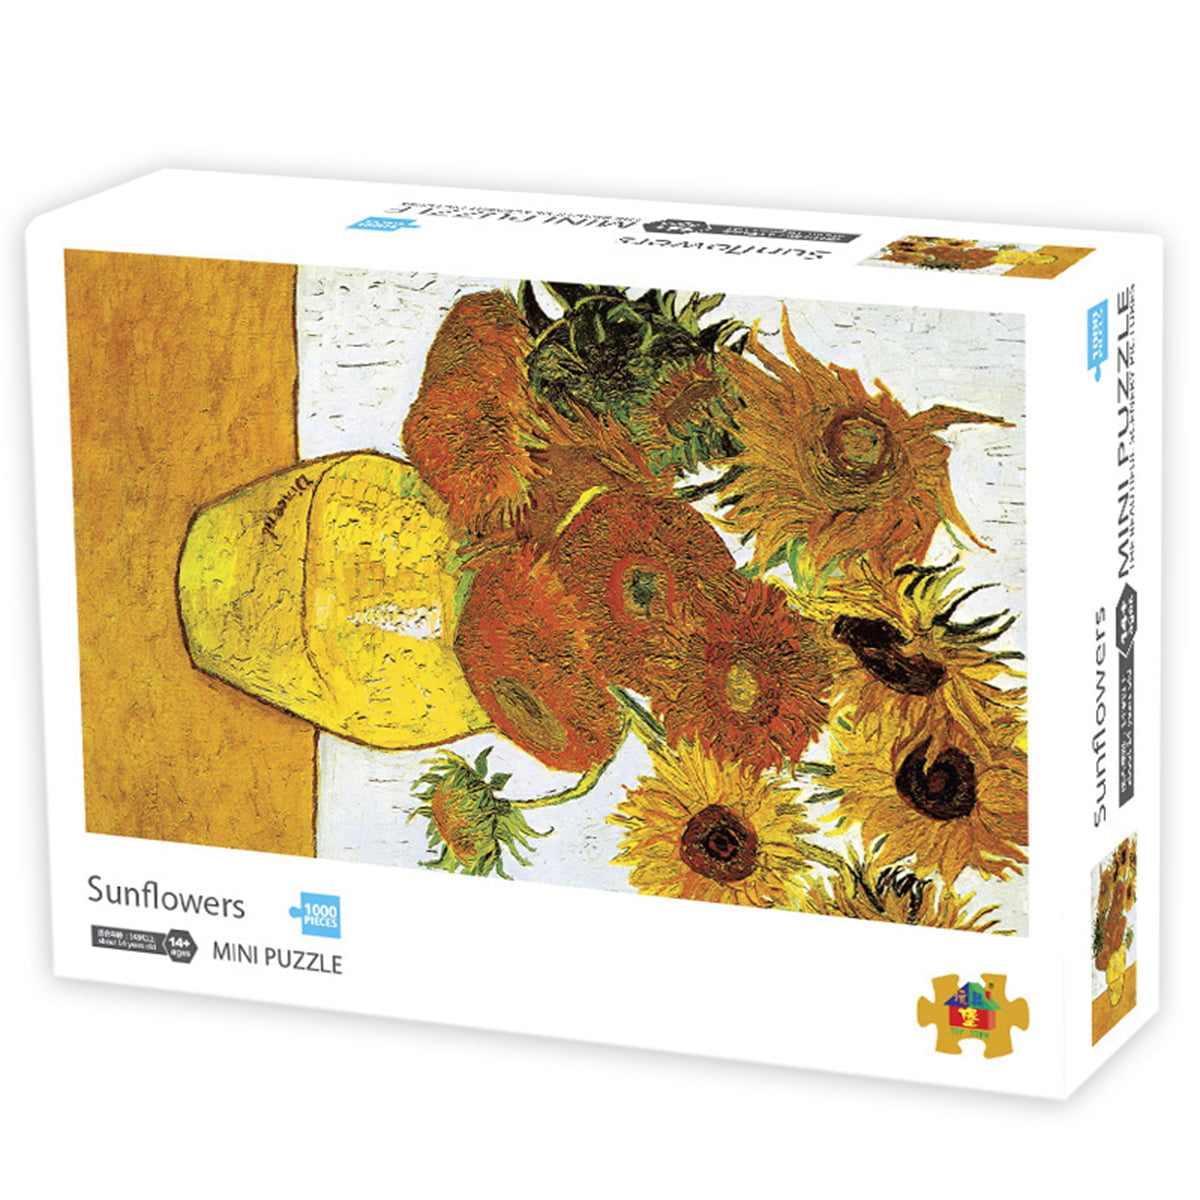 MY BIBY Wooden Jigsaw Puzzles 1000 Pieces for Adults Wood Sunflower Scenery Landscape Jigsaw Puzzles Toys 